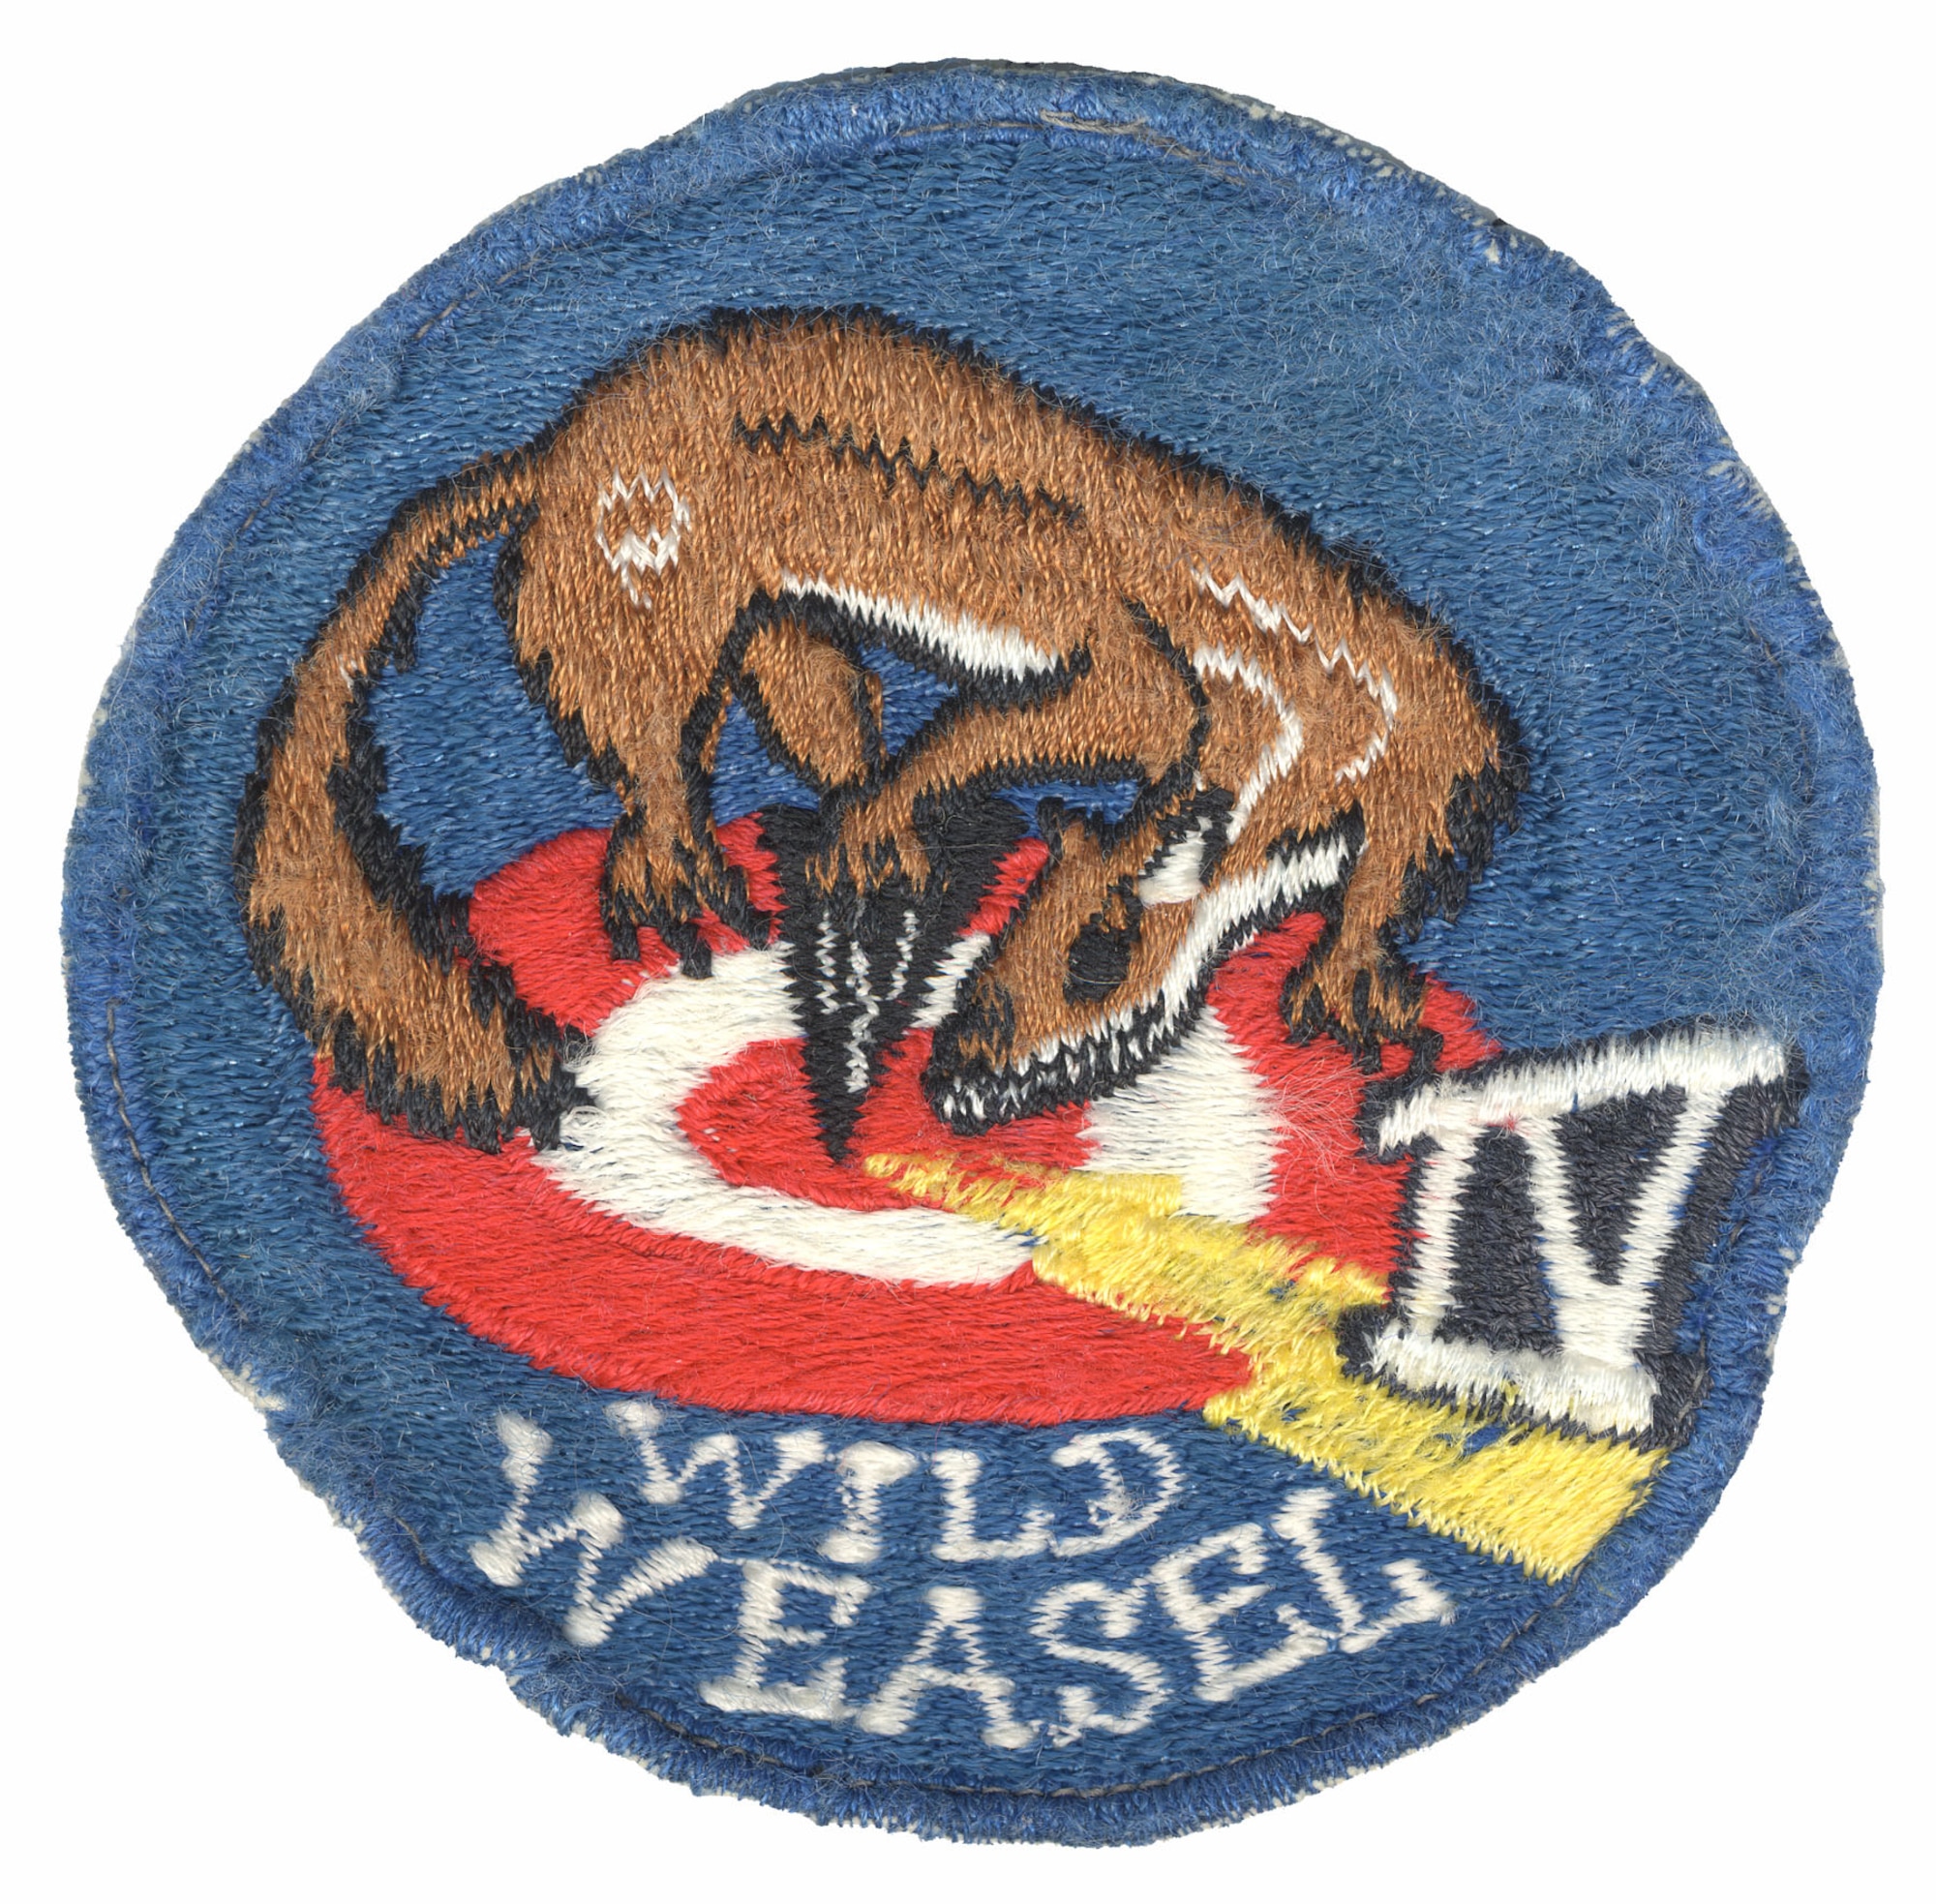 A weasel, nicknamed Willie, figures prominently in many official and unofficial Wild Weasel patches and logos. (U.S. Air Force)